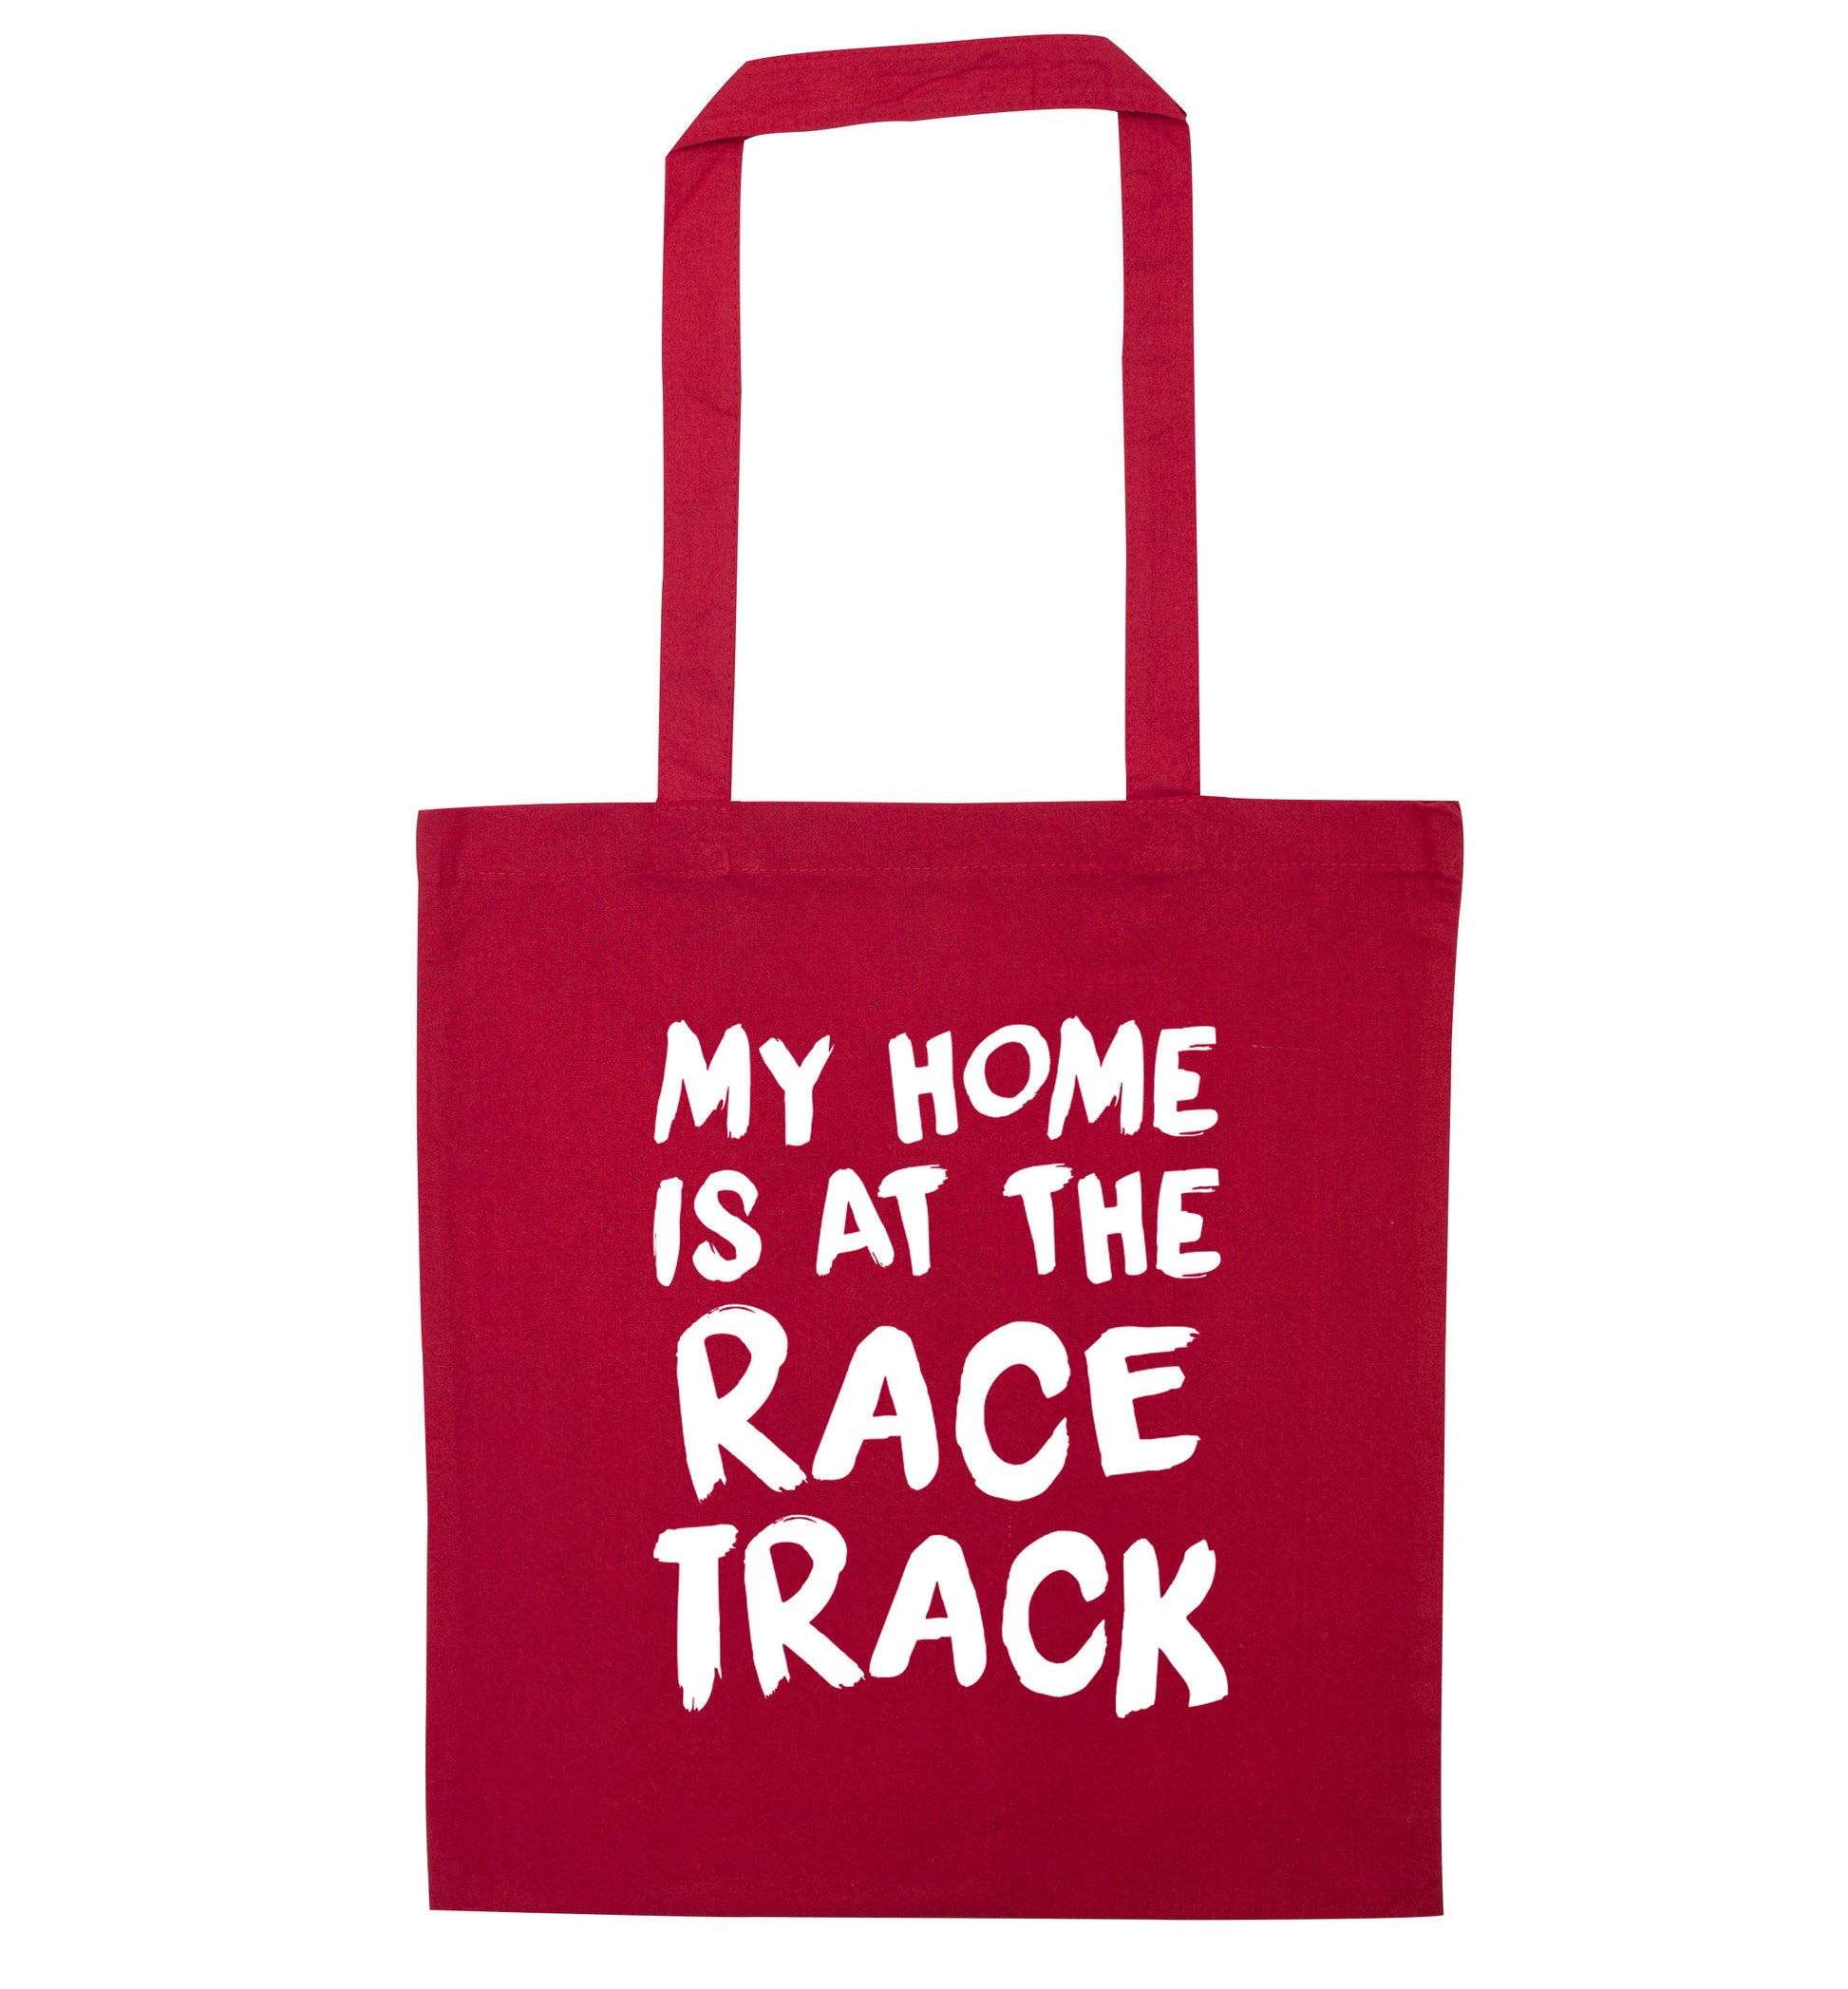 My home is at the race track red tote bag